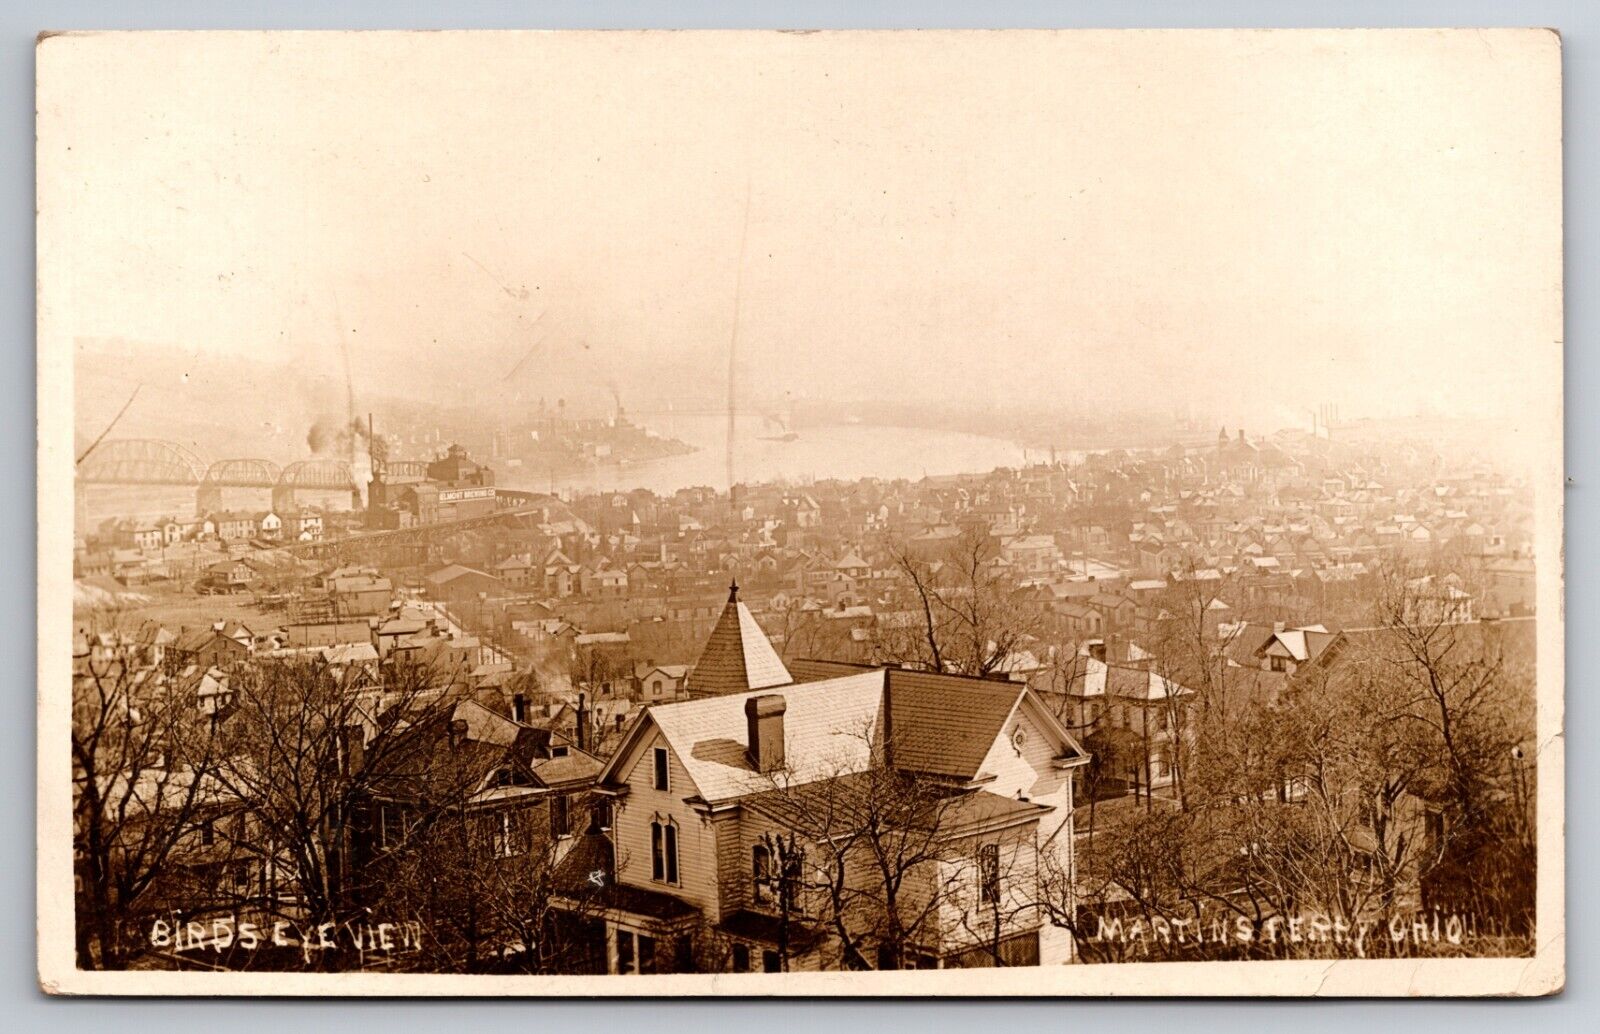 Birdseye View of Martins Ferry Ohio OH Belmont Brewing Co. c1915 Real Photo RPPC